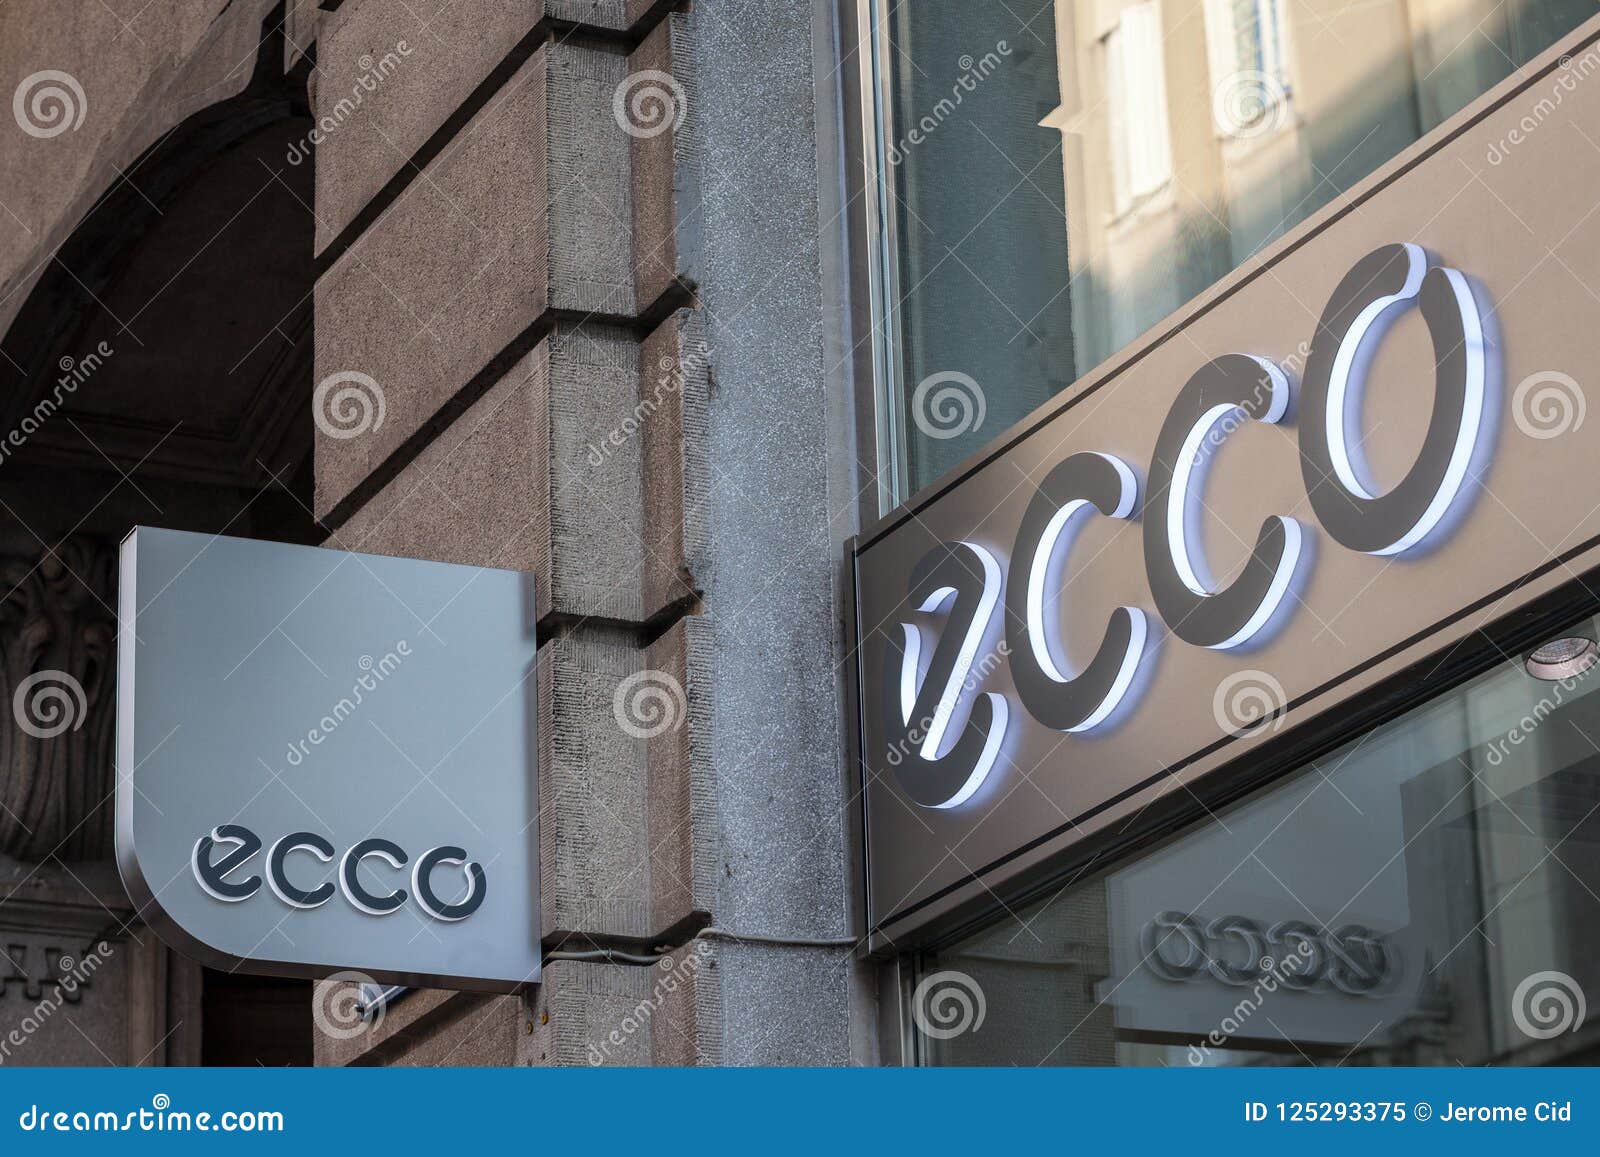 deltage stege Udgravning Ecco Sko Logo on Their Main Store for Serbia in Belgrade. Ecco is a Danish  Brand of Shoes Editorial Image - Image of danish, later: 125293375